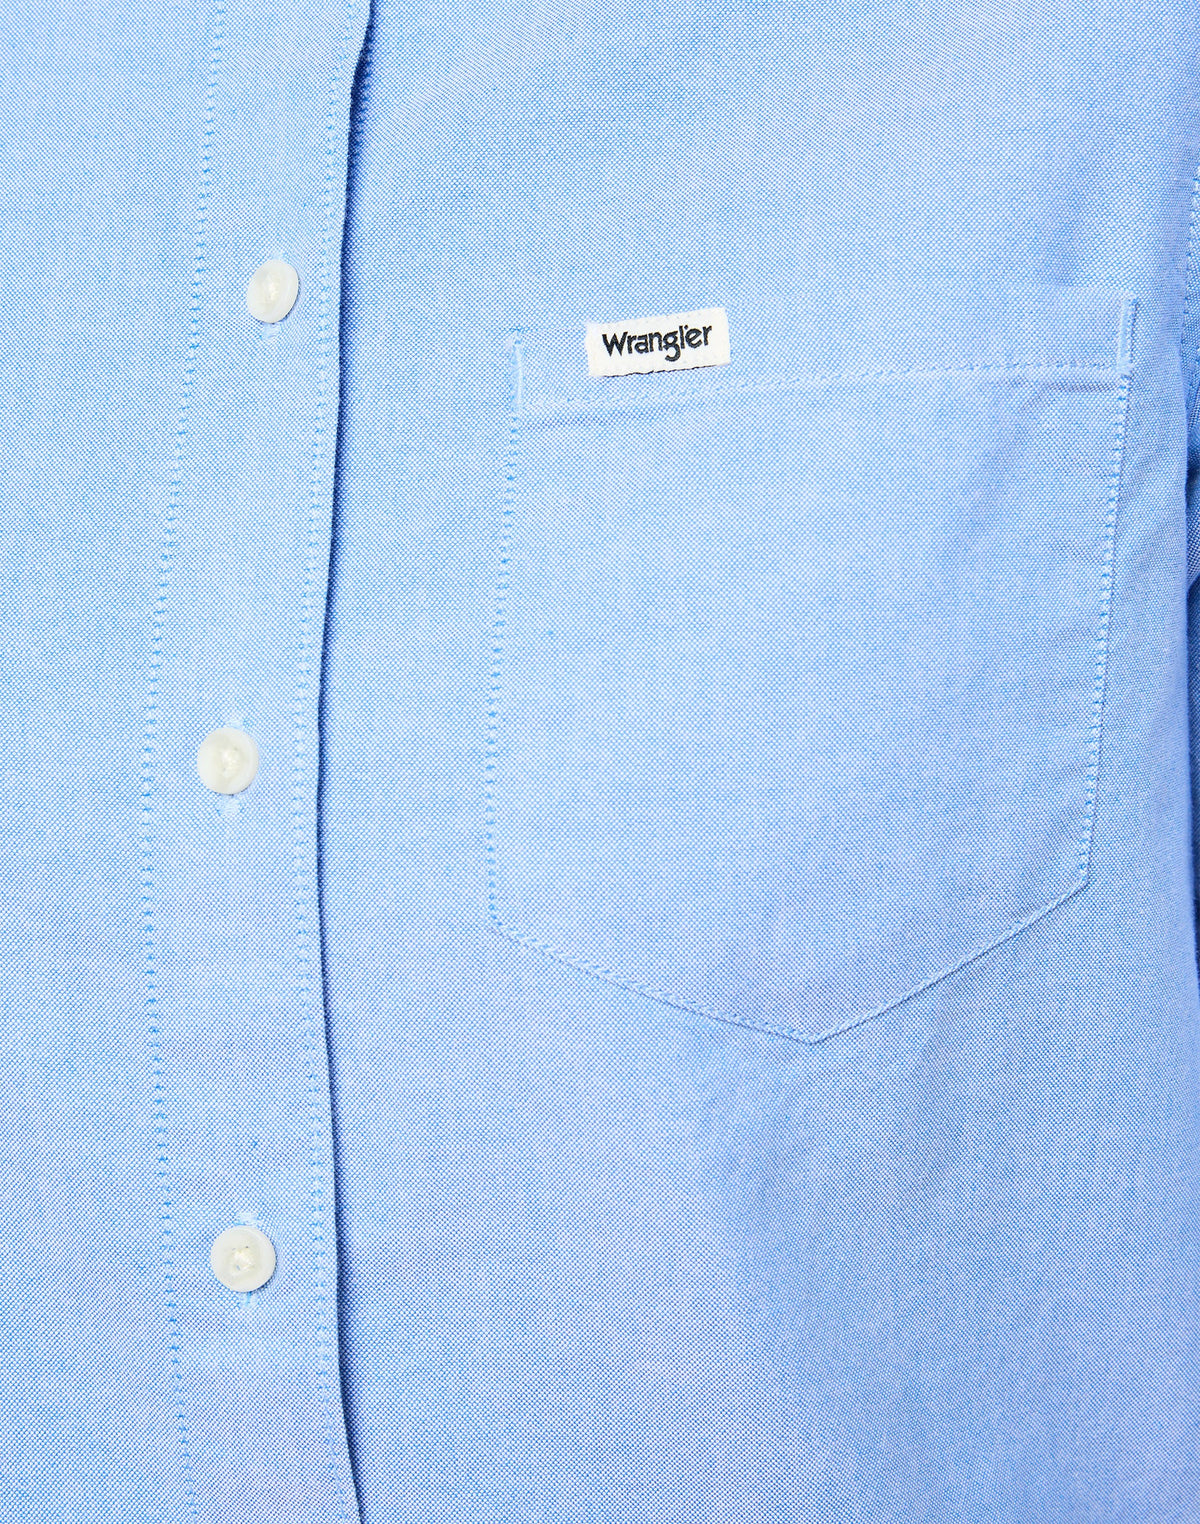 One Pocket Shirt in Bright Blue